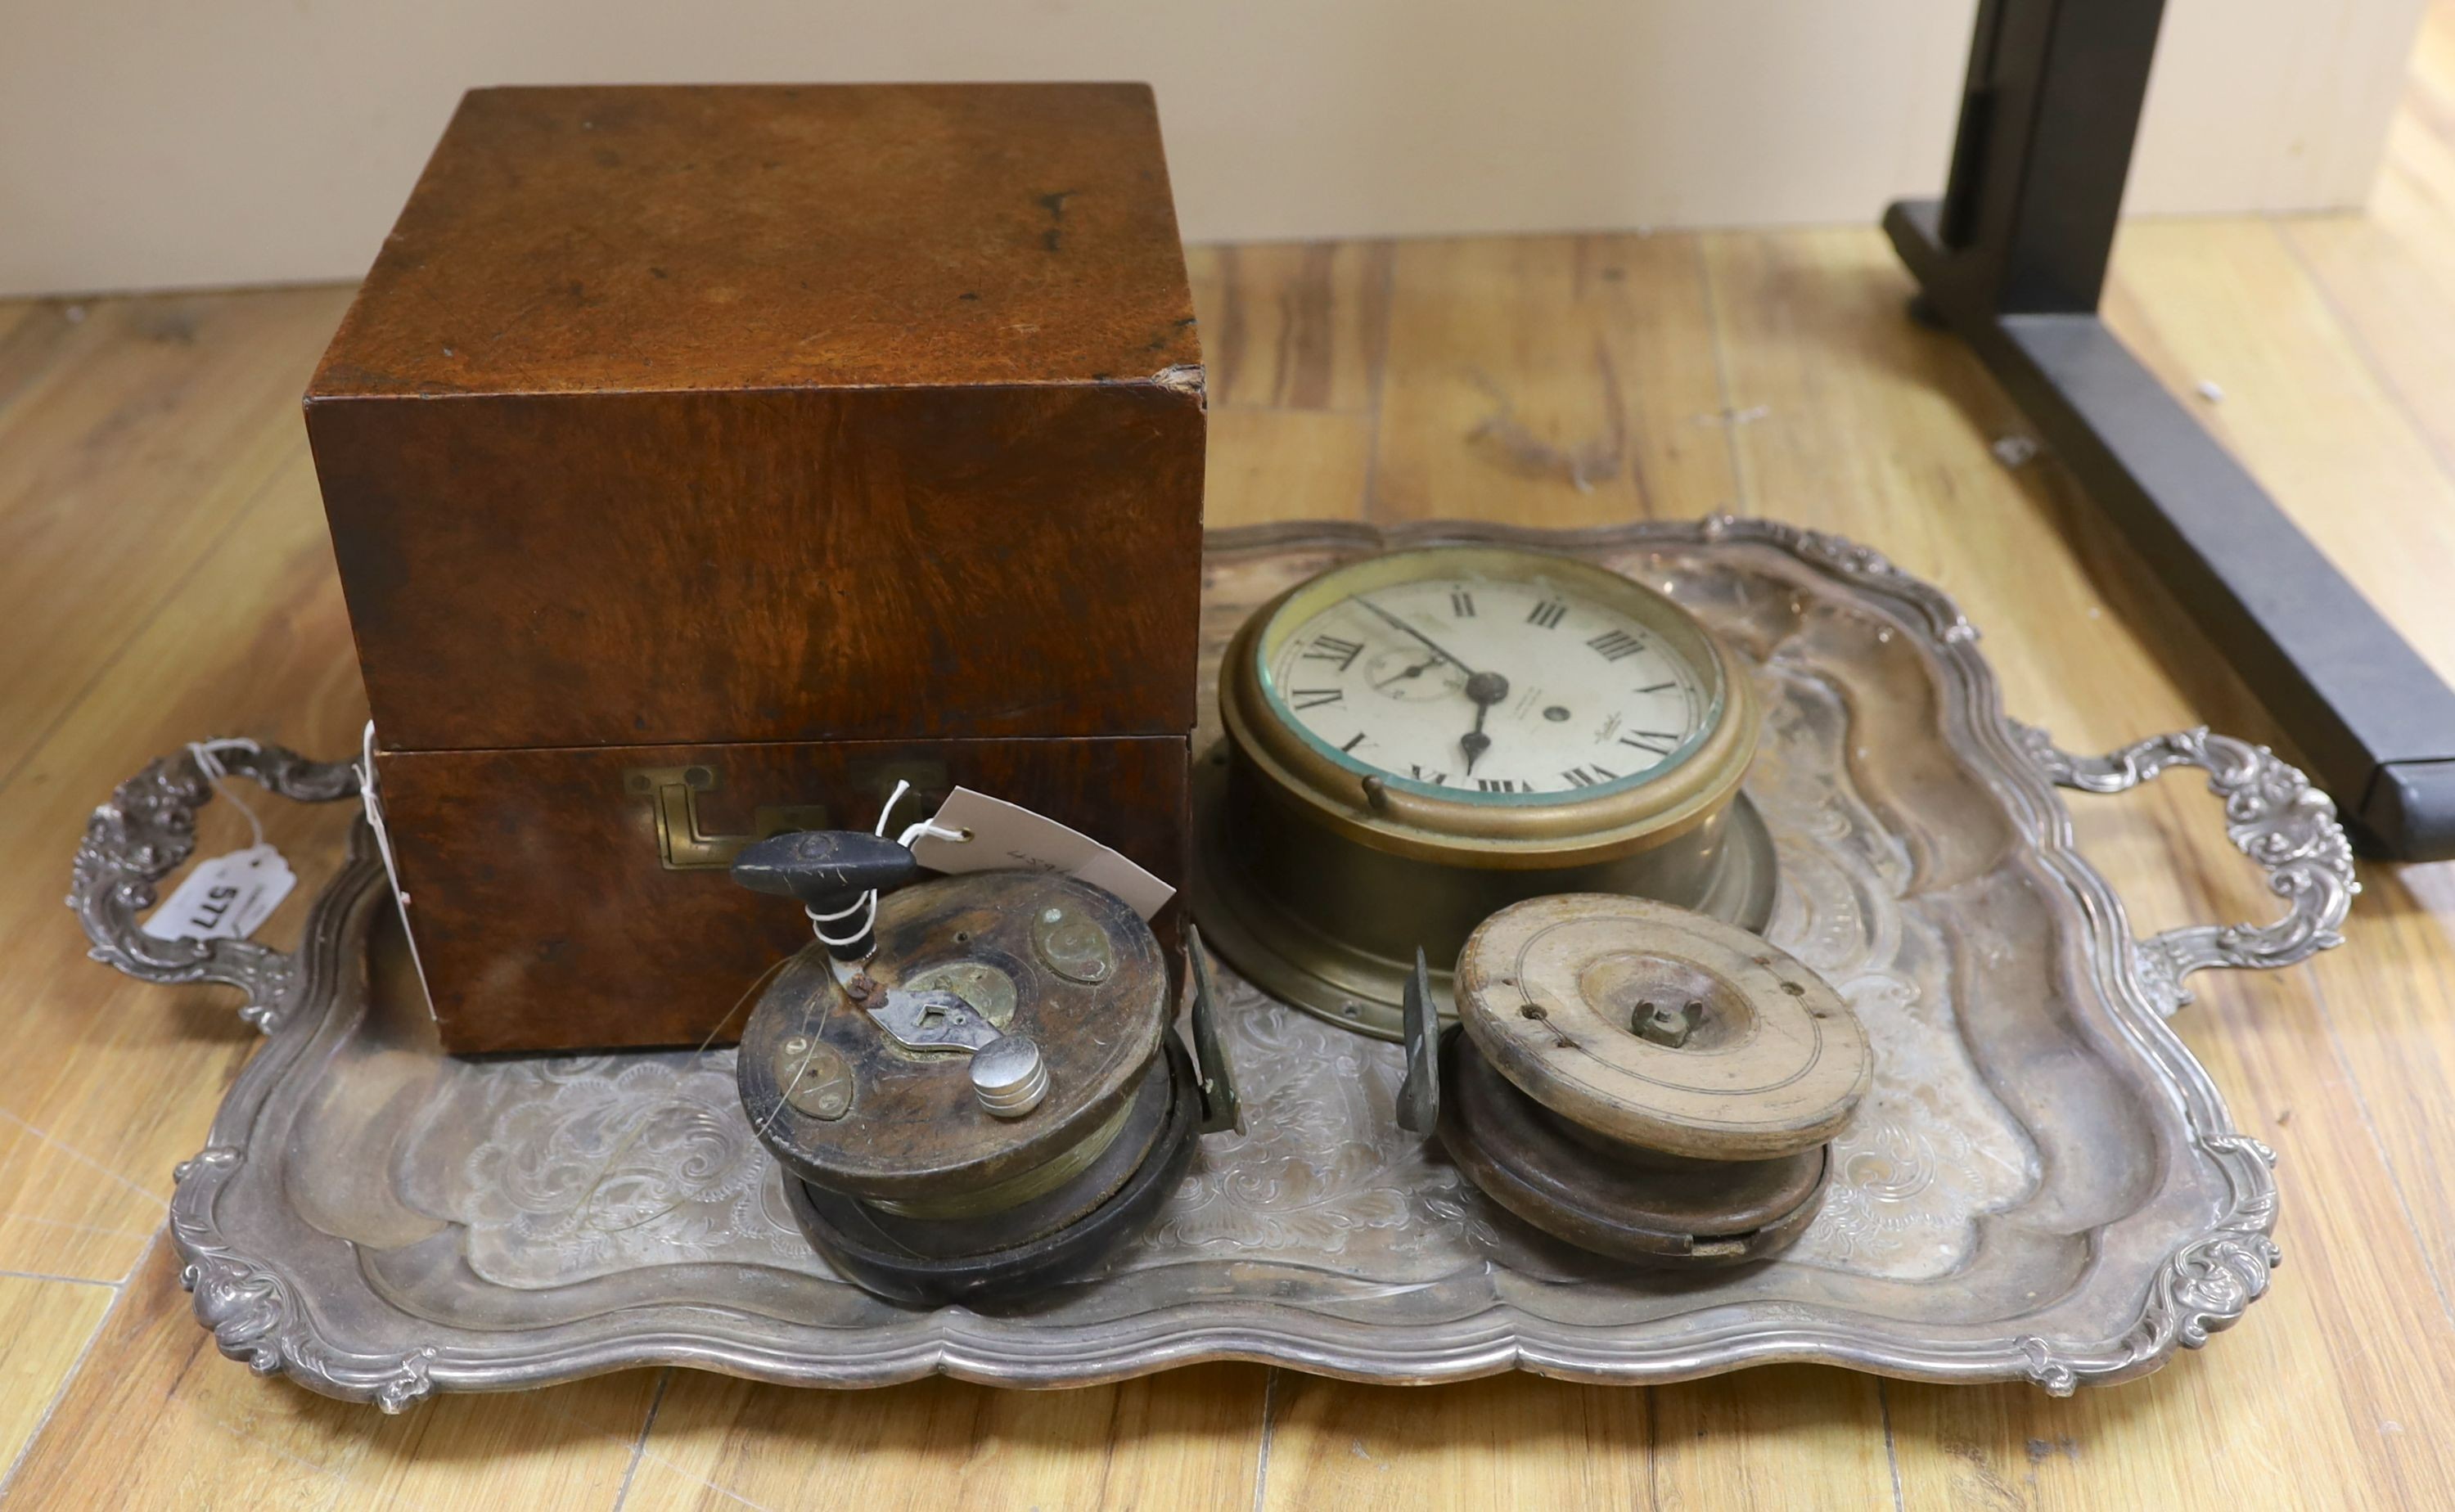 A 19th century amboyna box, 22cm wide, a Sestrel ship's wall clock, no key - 20cm diameter, a large plated two-handled tray - 71cm long, Vintage Ogden Smith fishing reel together with another (5)